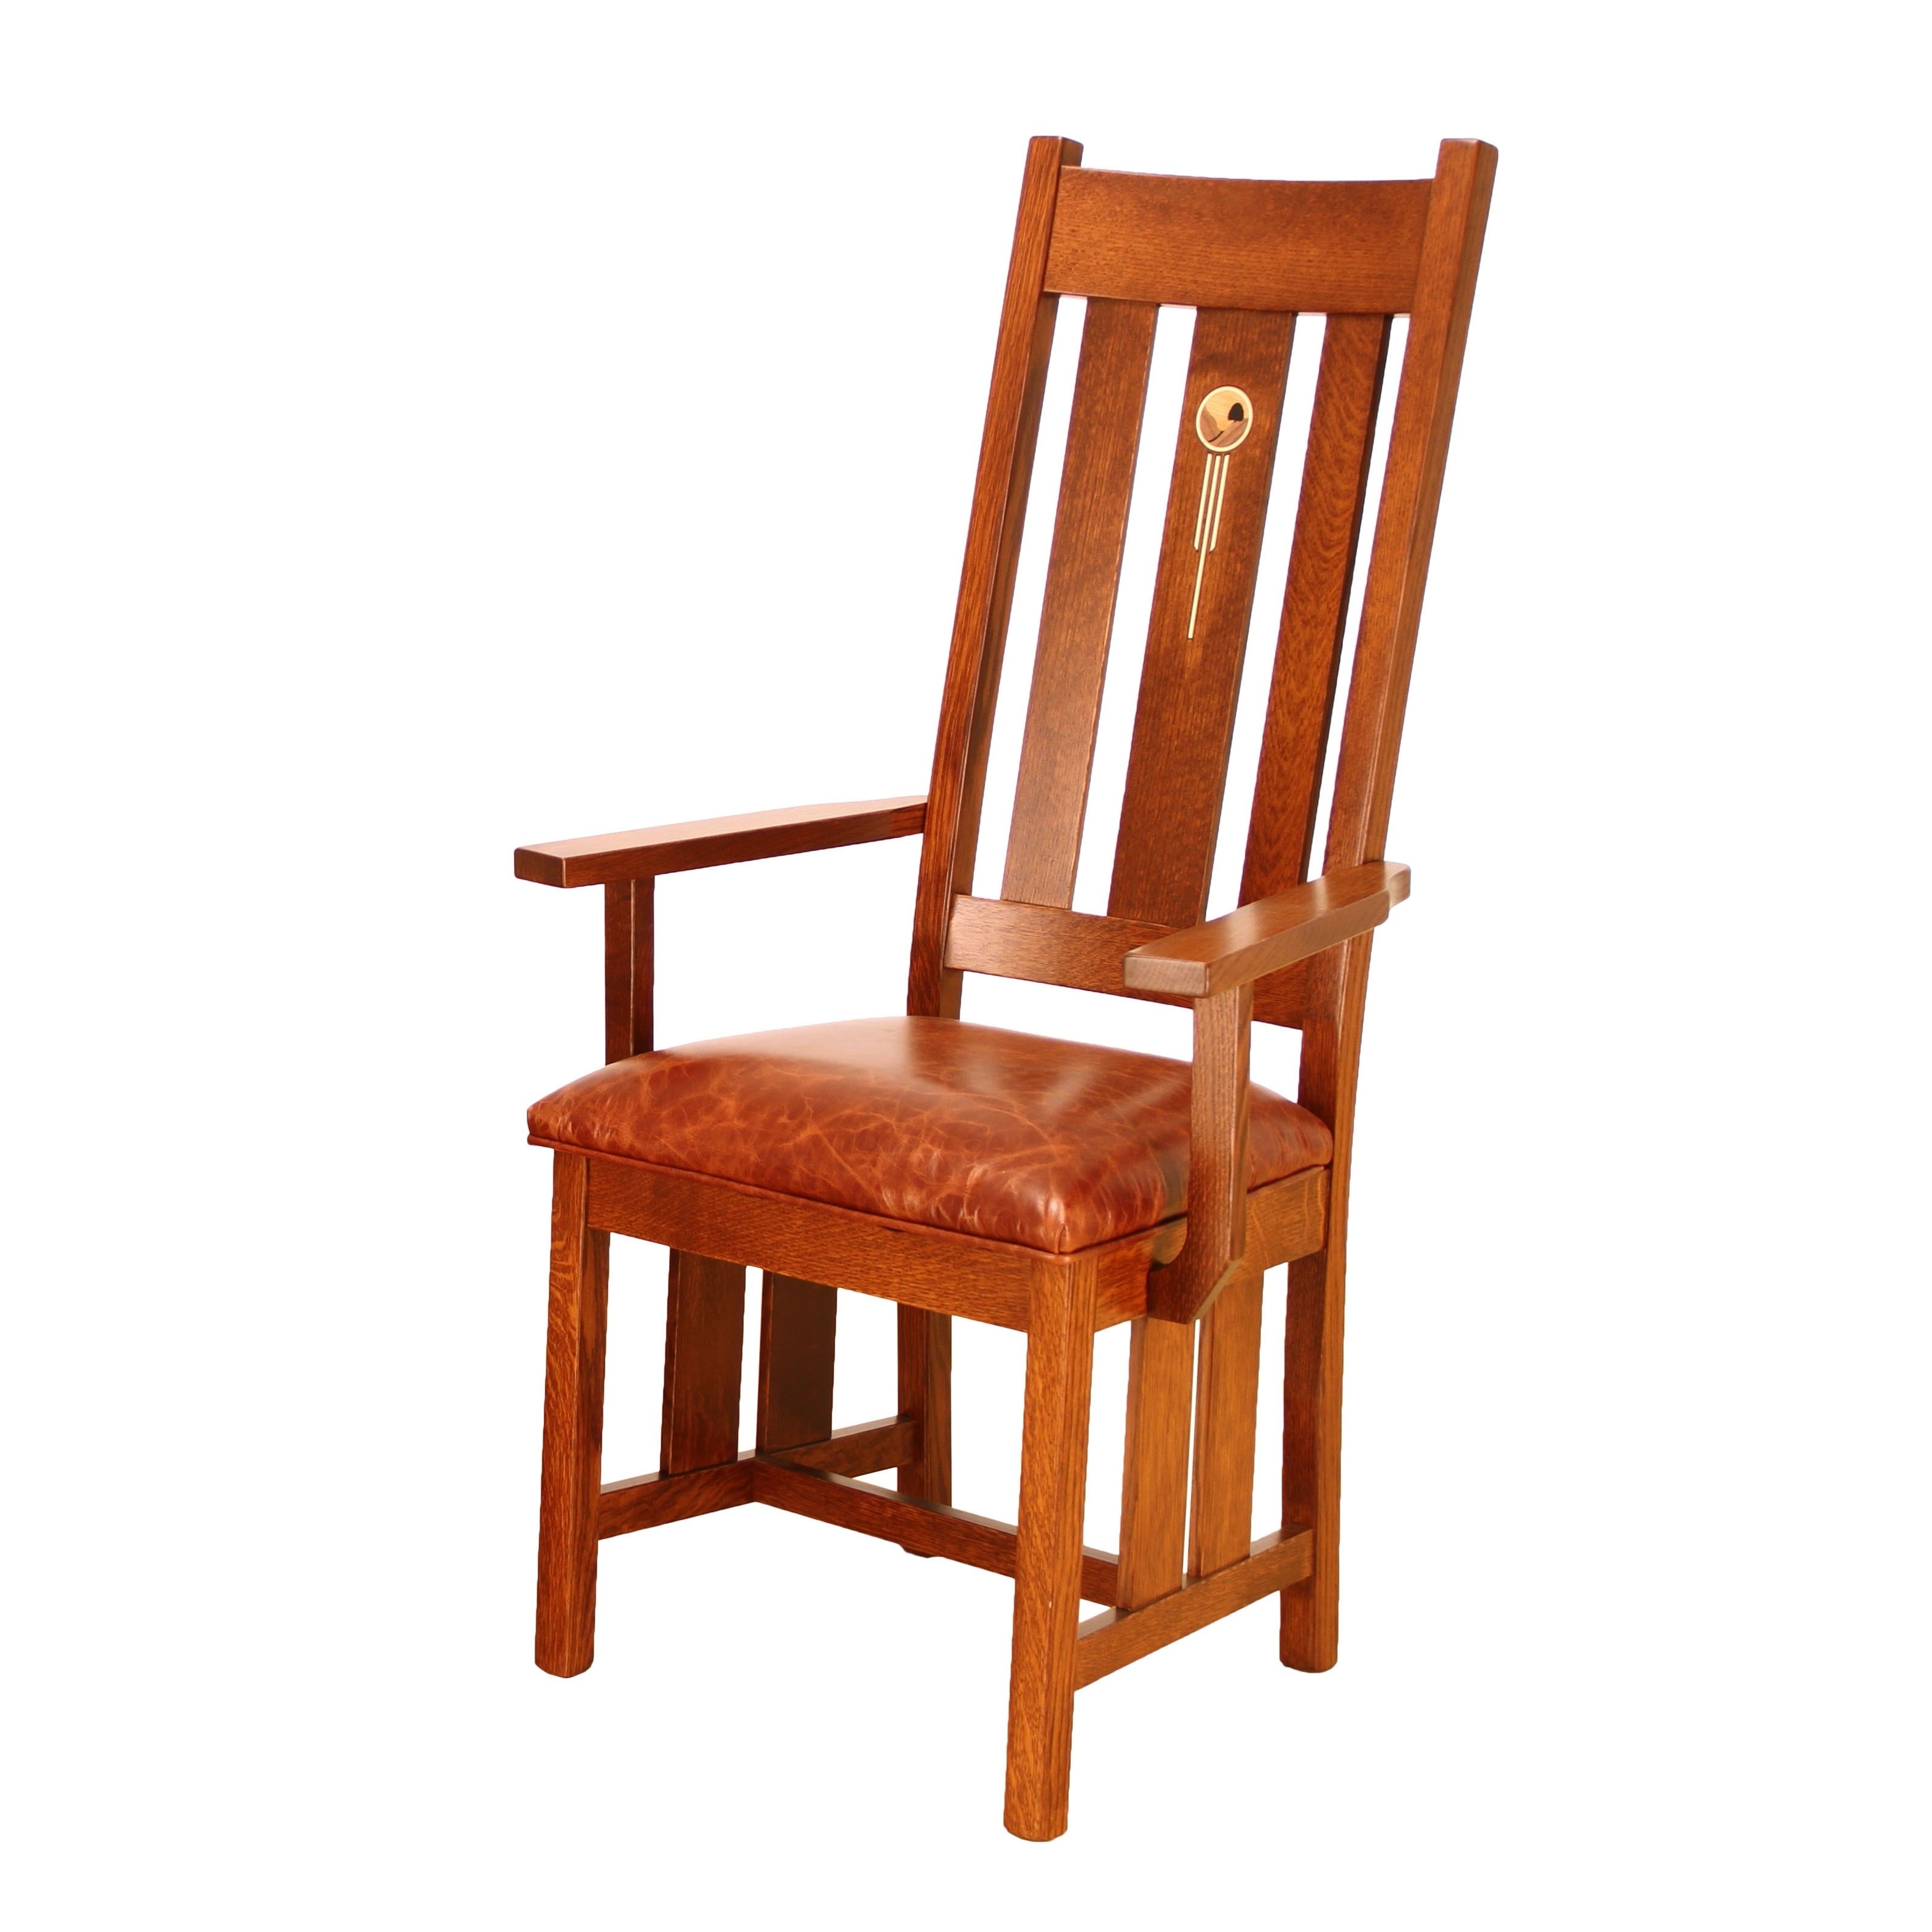 San Luis Traditions Regarding Well Liked Craftsman Arm Chairs (View 4 of 20)